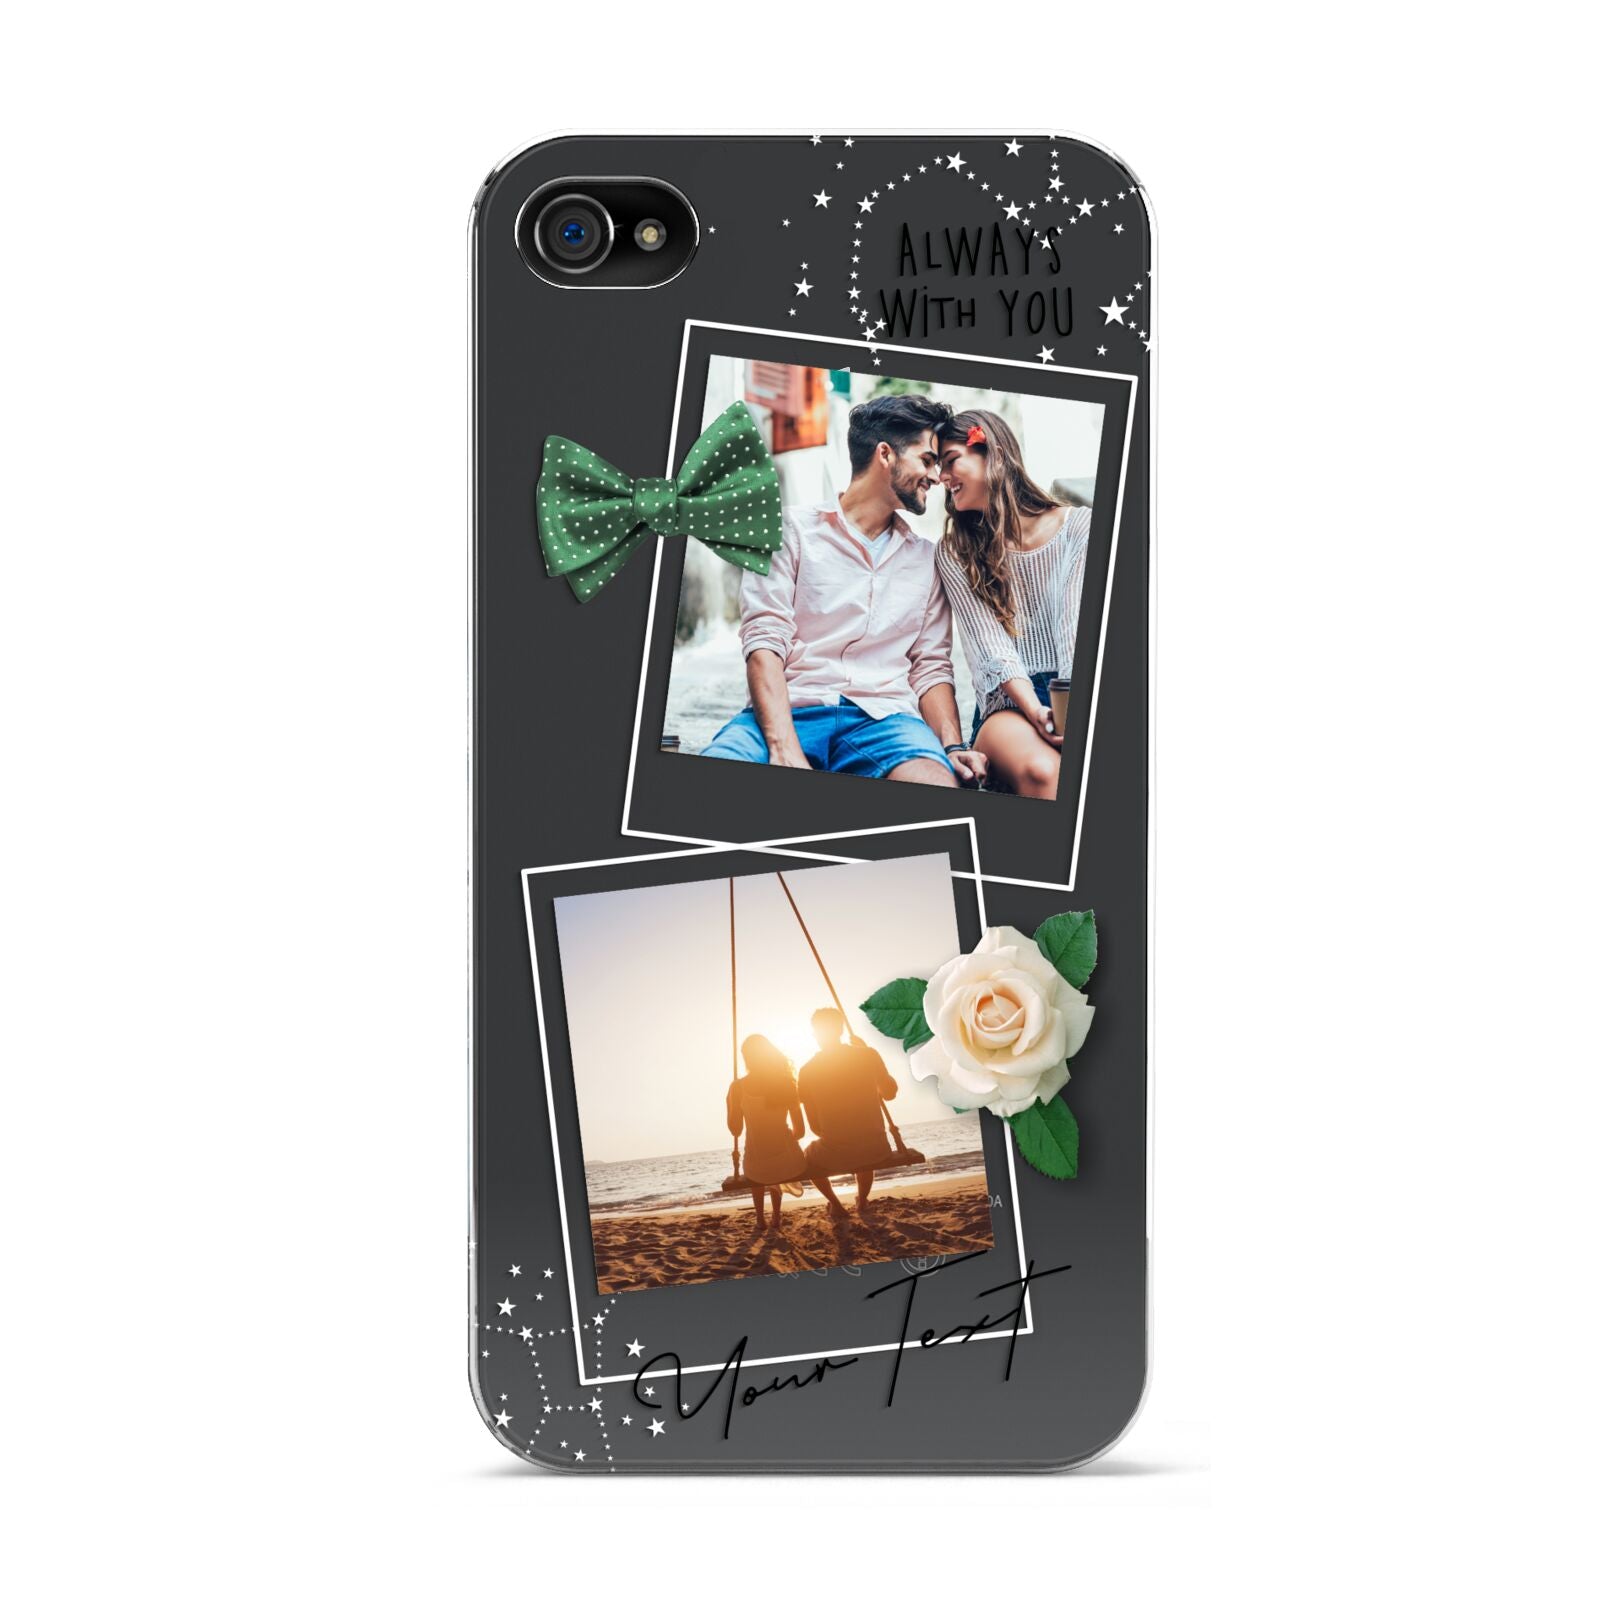 Astrology Photo Montage Upload with Text Apple iPhone 4s Case